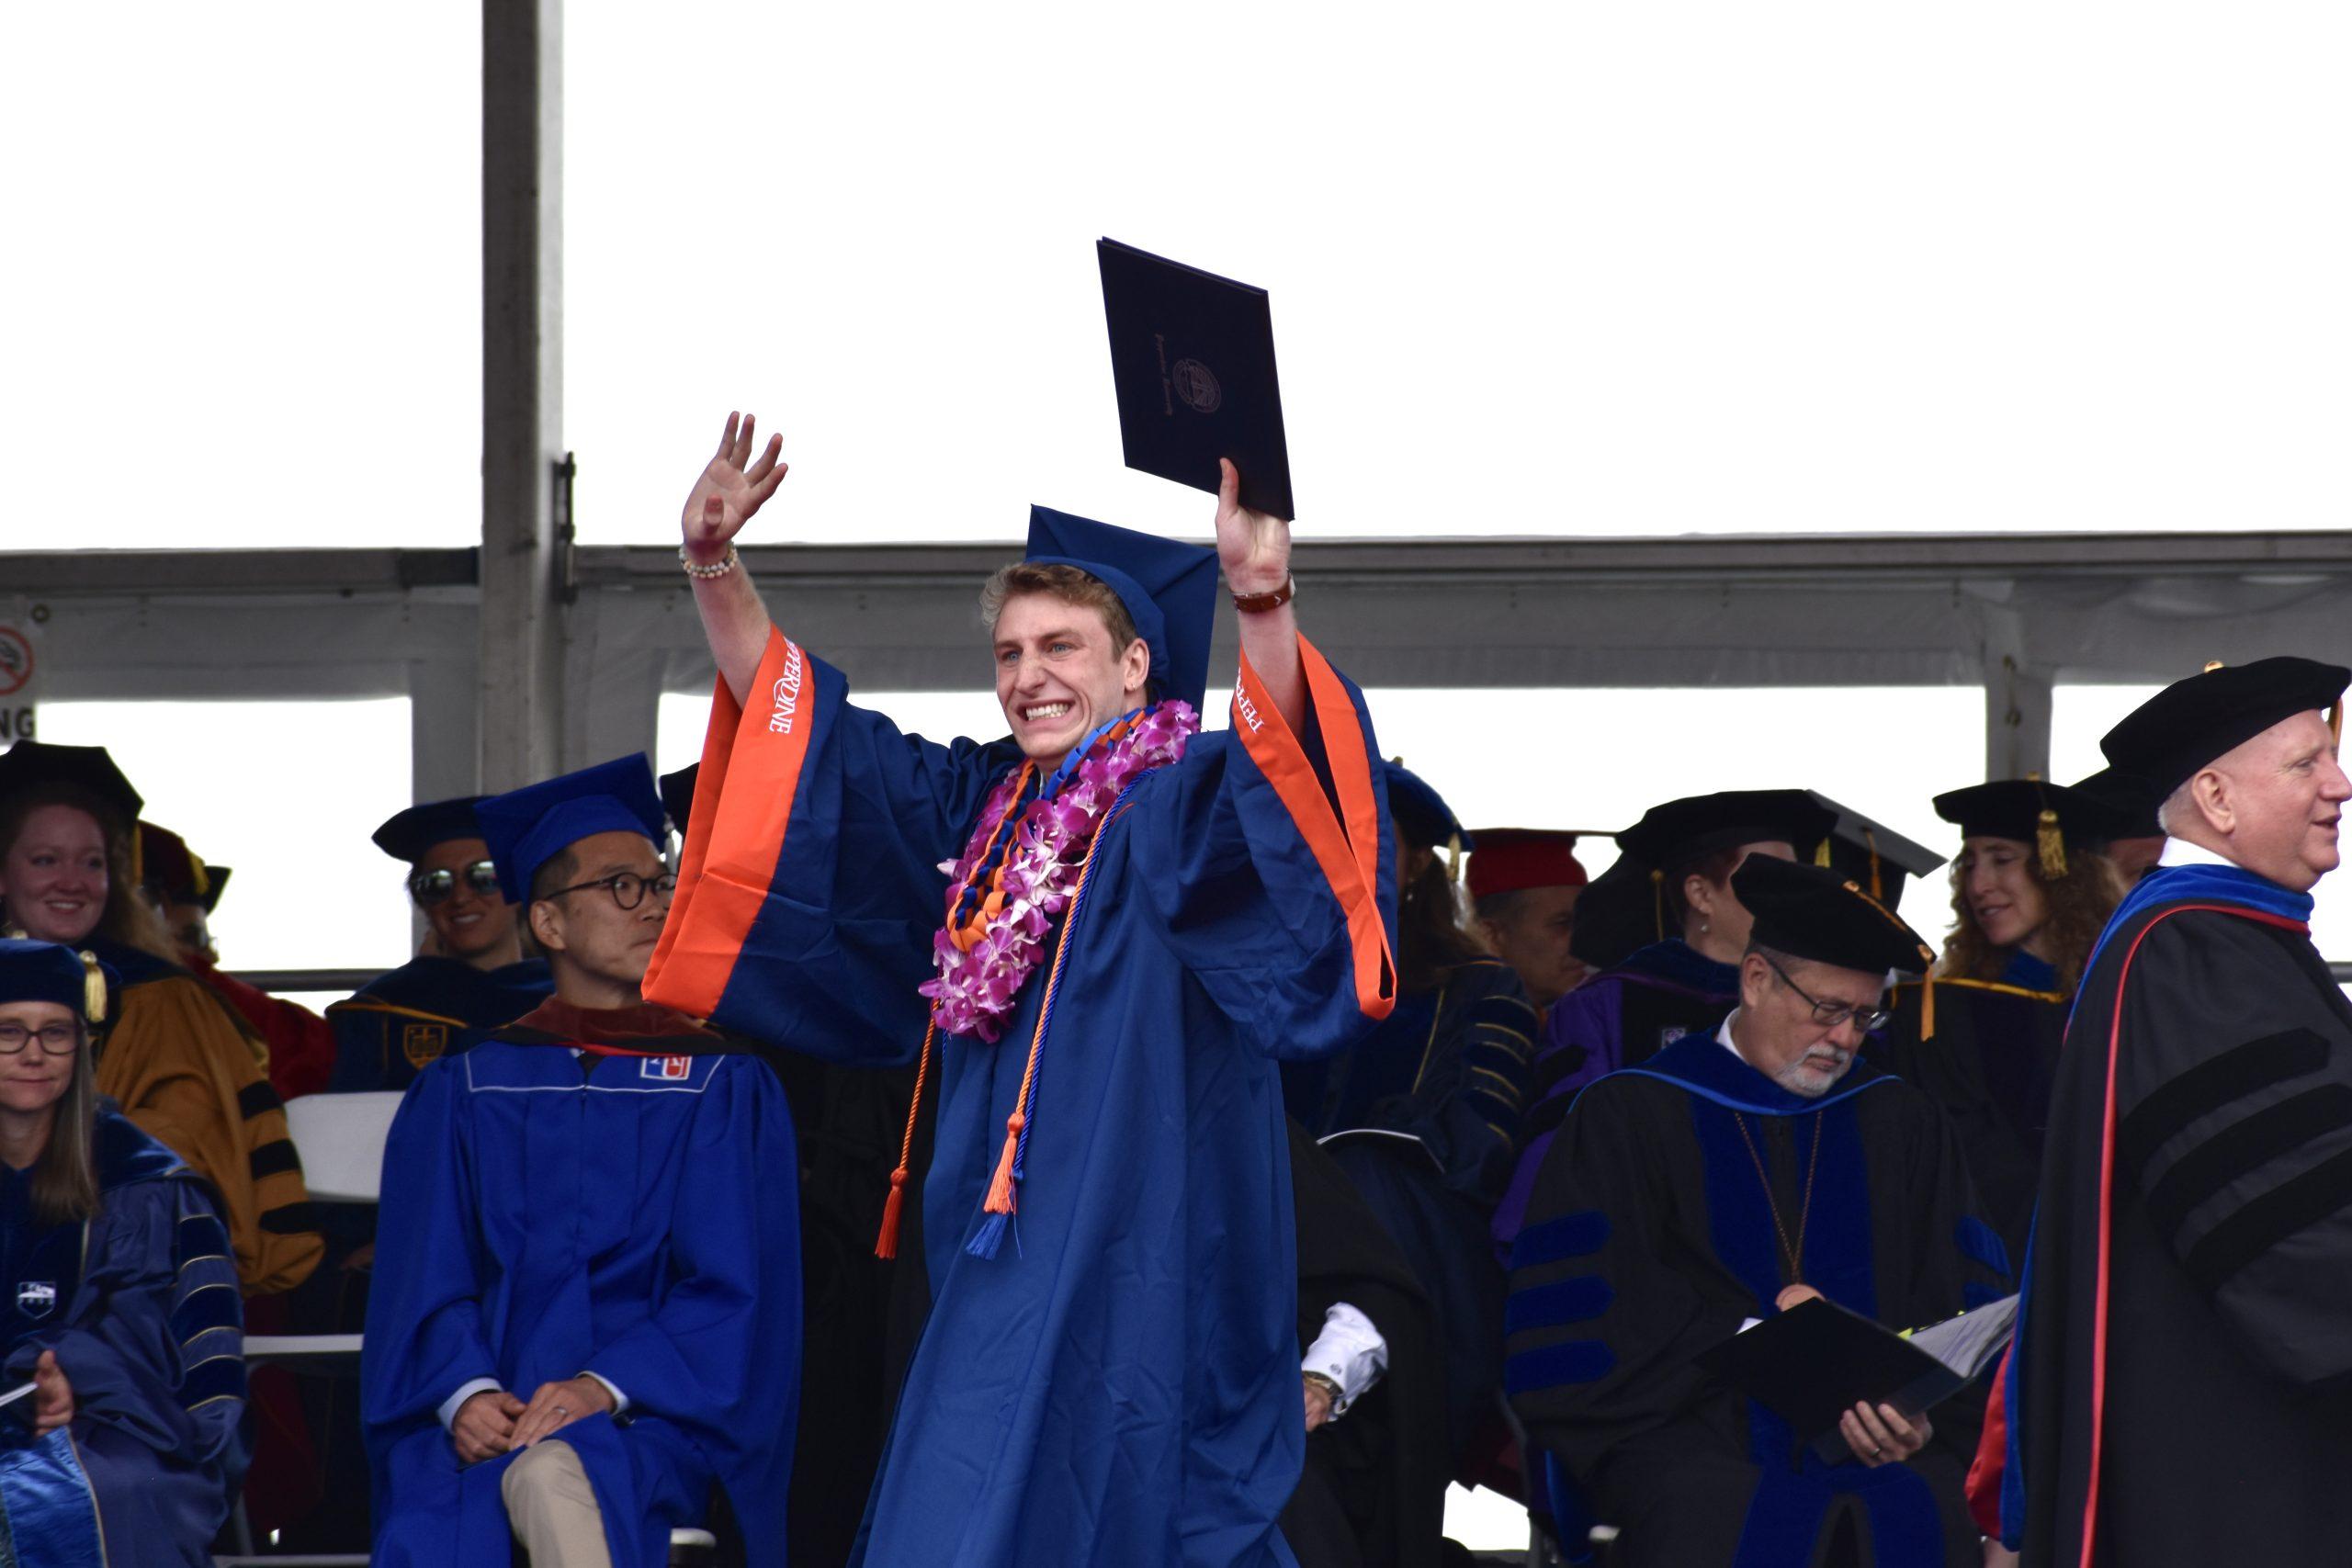 Making it to the Finish Line: Pepperdine Class of 2023 Walk the Stage